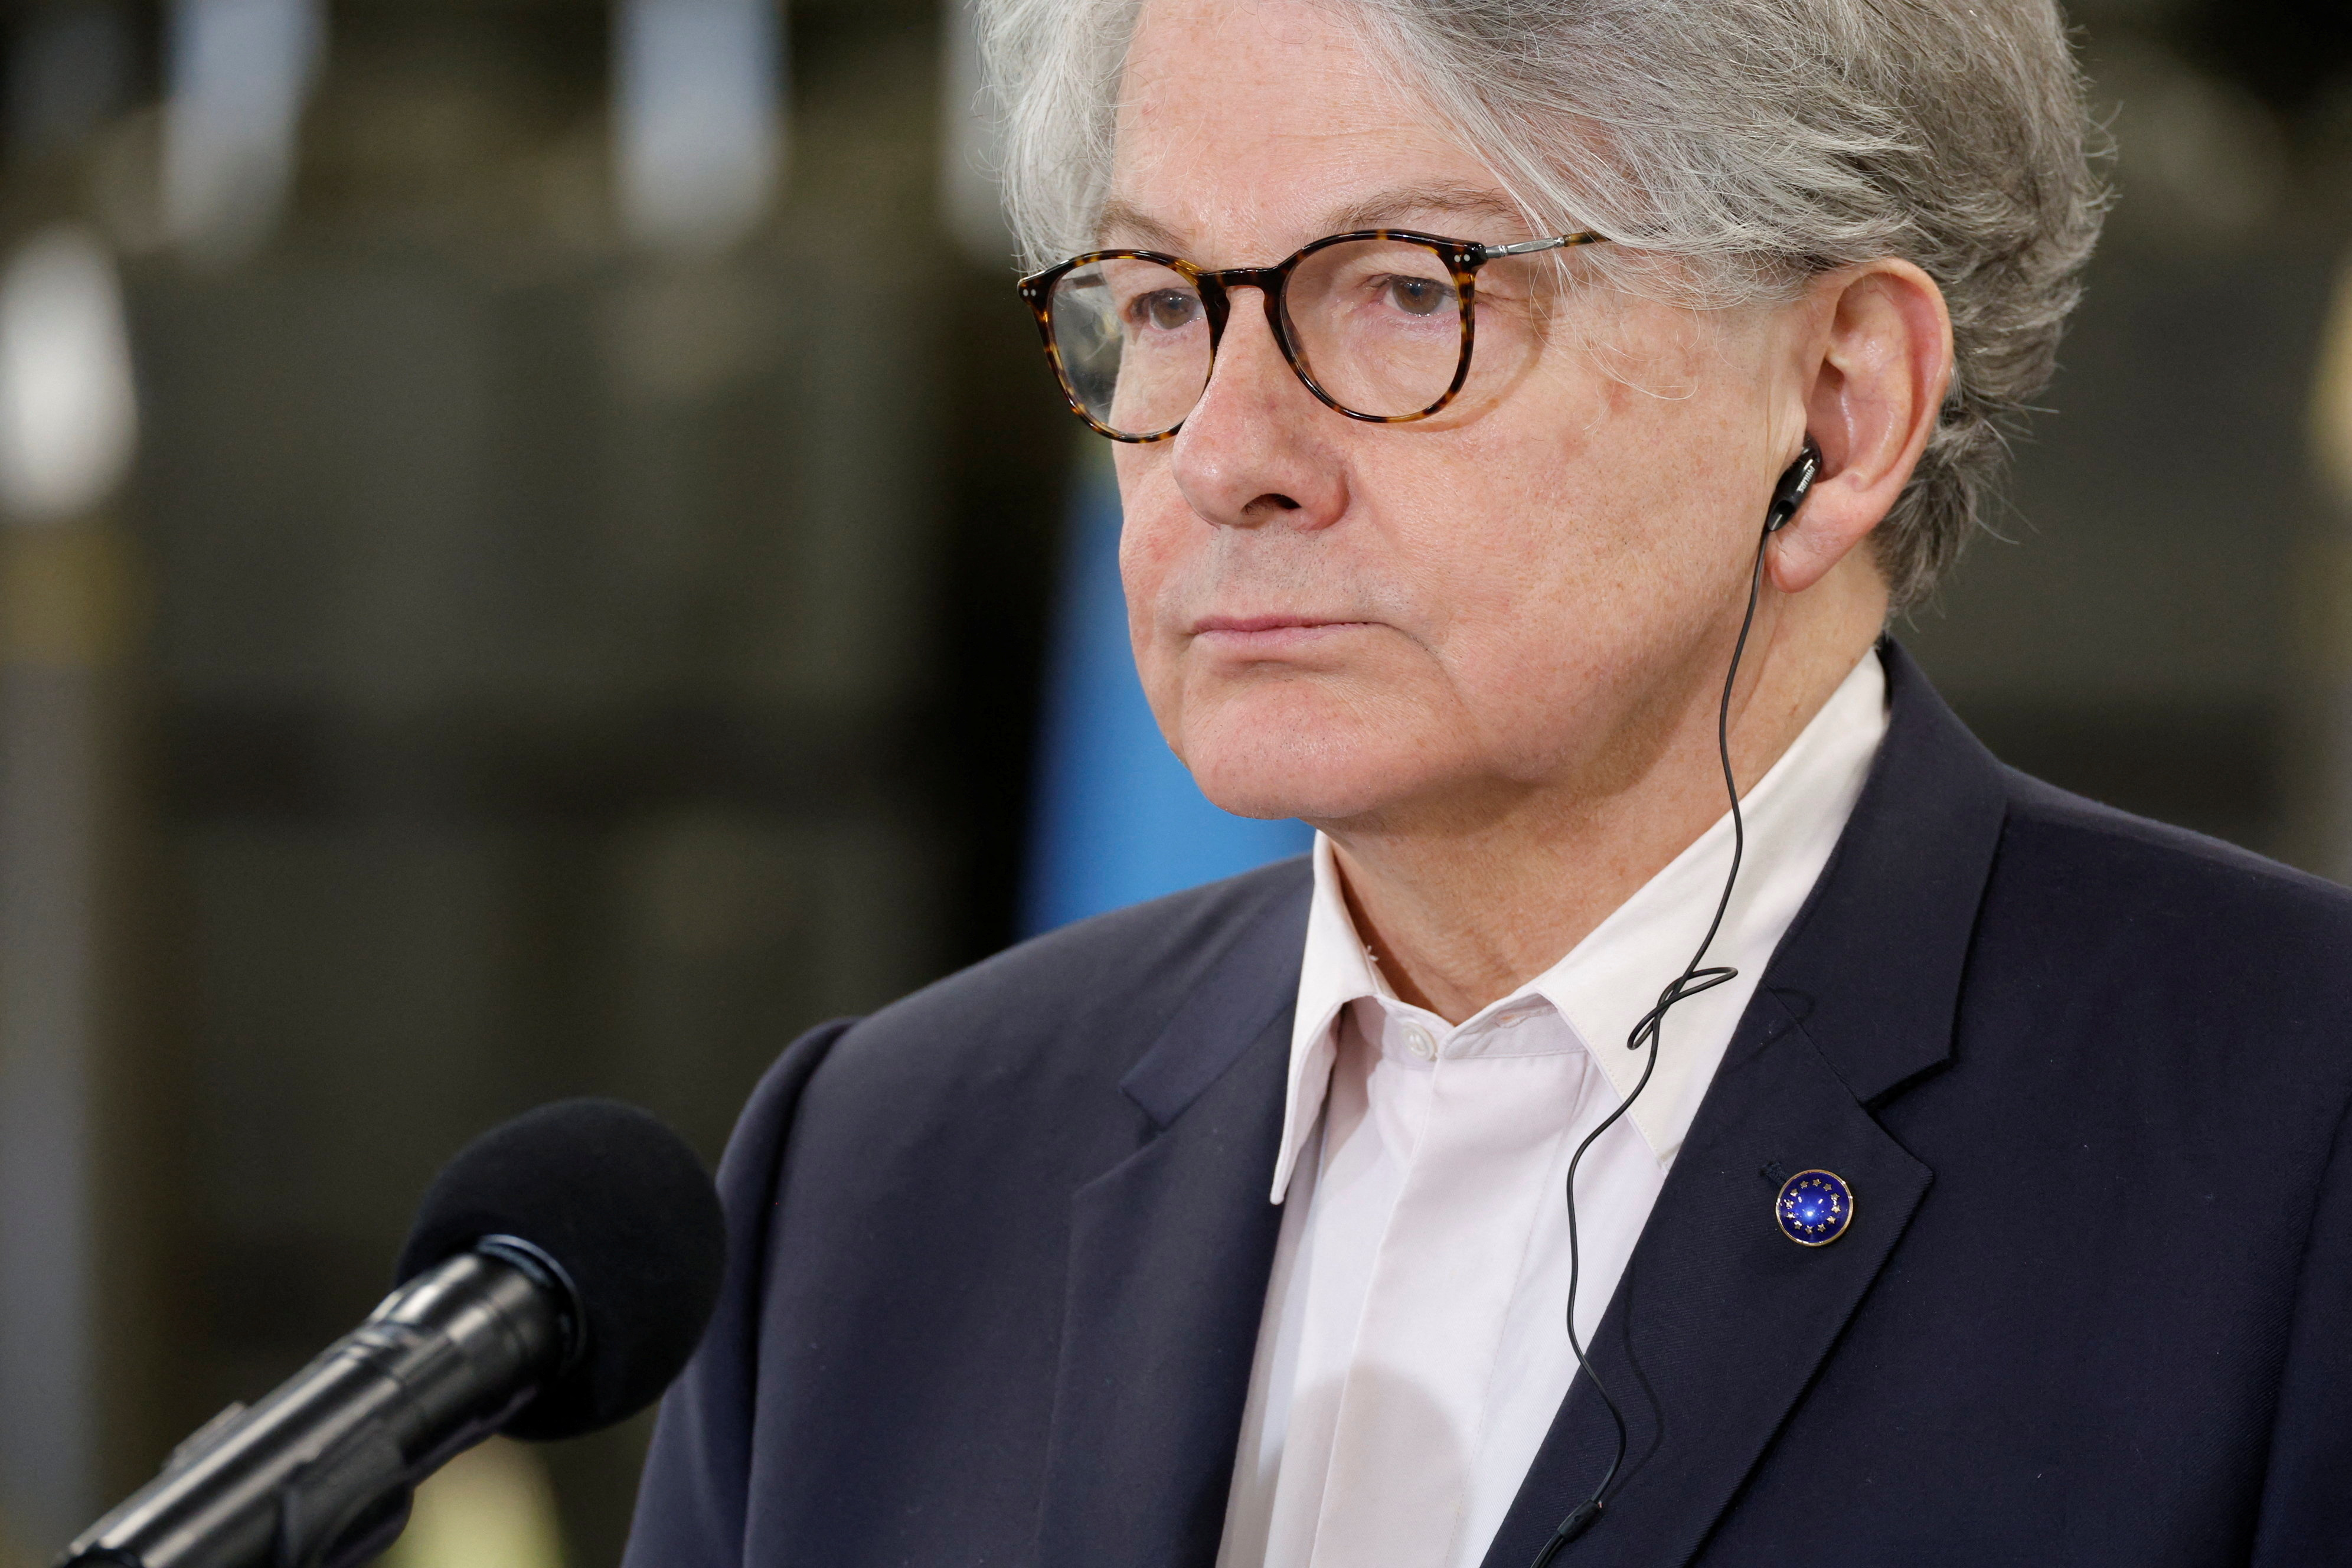 EU Commissioner for Internal Market Thierry Breton looks on during a news conference after a visit in an ammunition factory in Nowa Deba, Poland, March 27, 2023. Patryk Ogorzalek/Agencja Wyborcza.pl via REUTERS ATTENTION EDITORS - THIS IMAGE WAS PROVIDED BY A THIRD PARTY. POLAND OUT. NO COMMERCIAL OR EDITORIAL SALES IN POLAND.